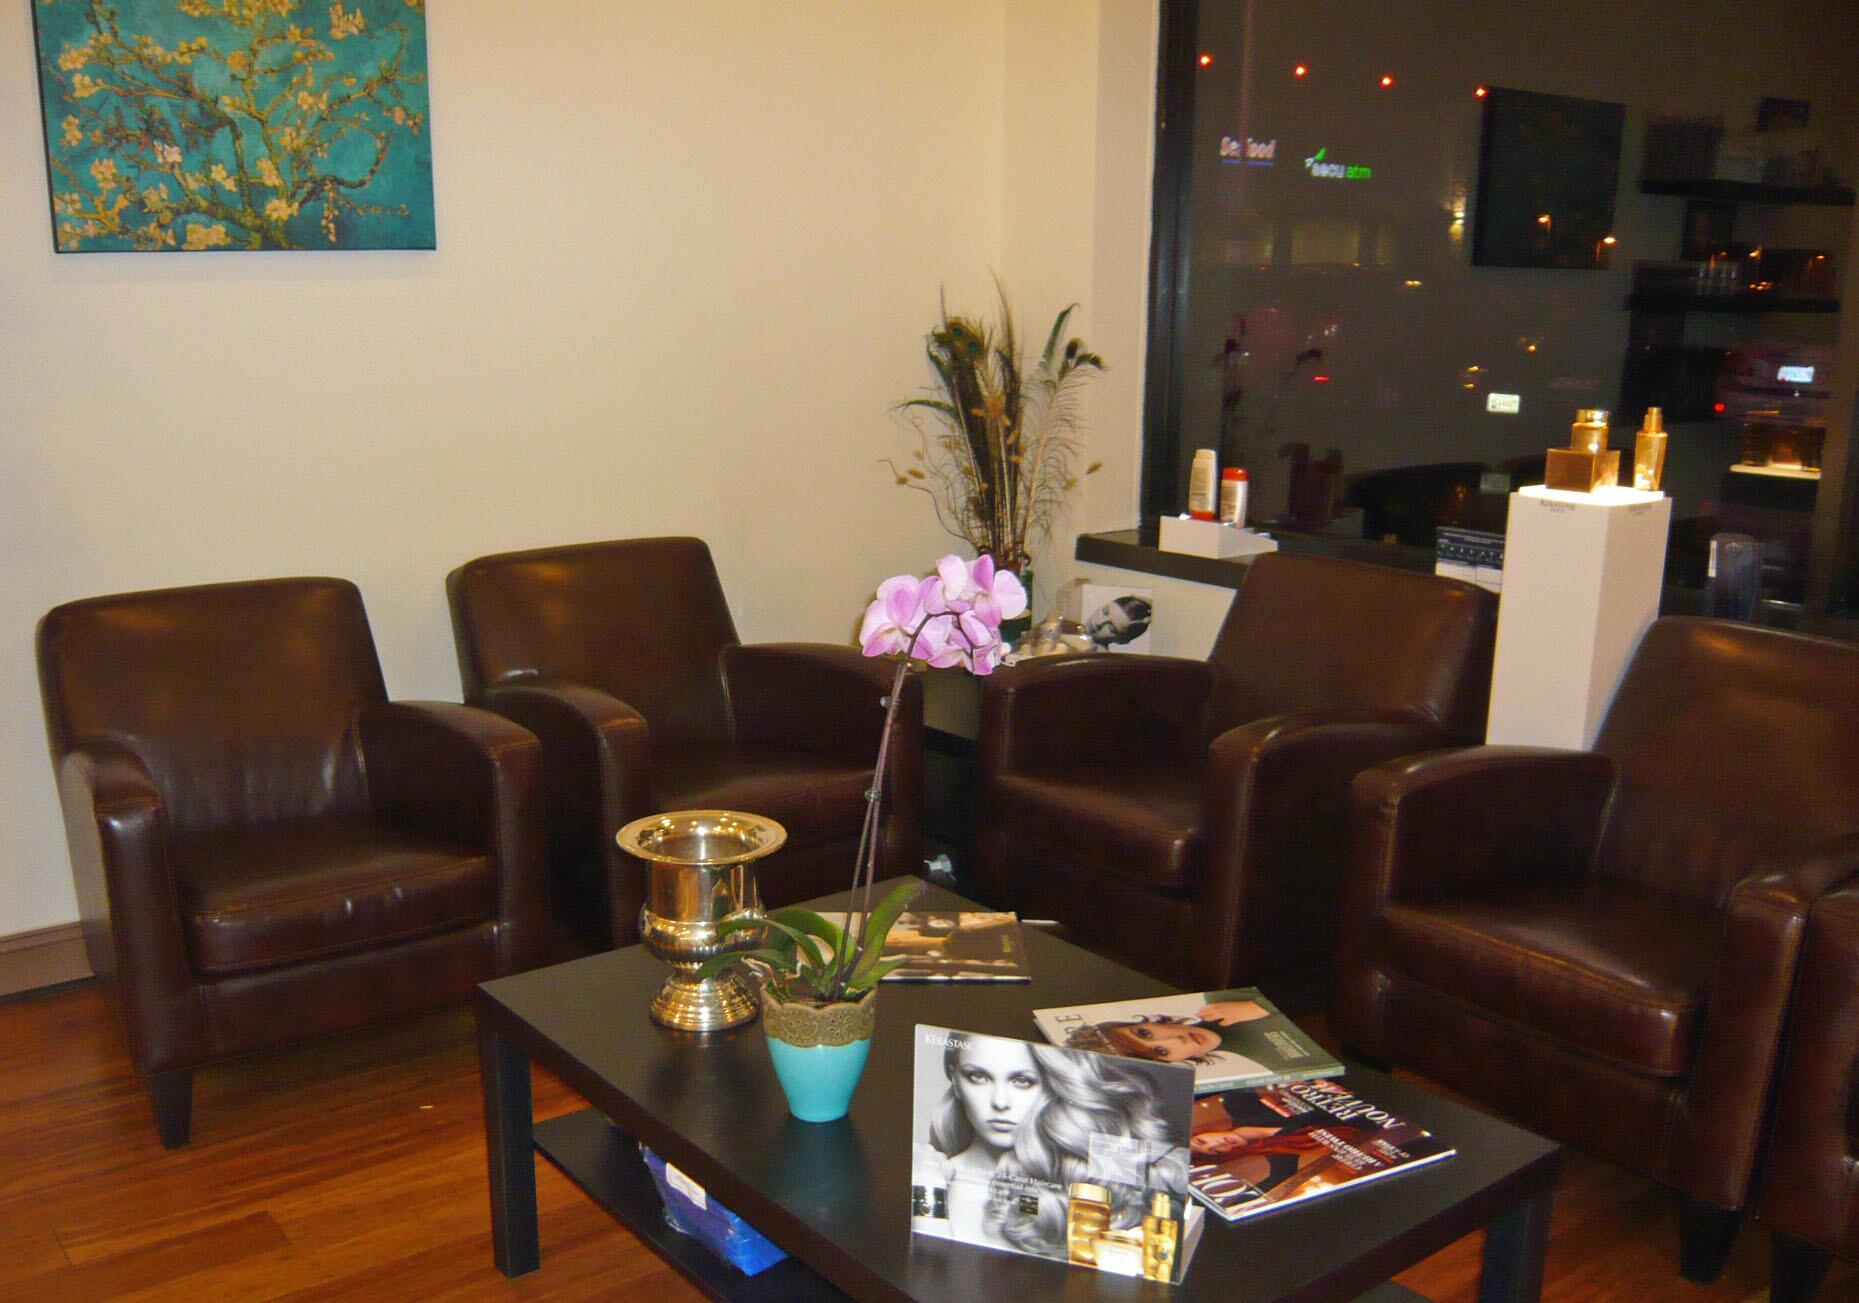 Salon Craft waiting lounge, where clients enjoy refreshments in comfortable leather chairs.  Styling guides placed throughout the space help to inspire the perfect look.